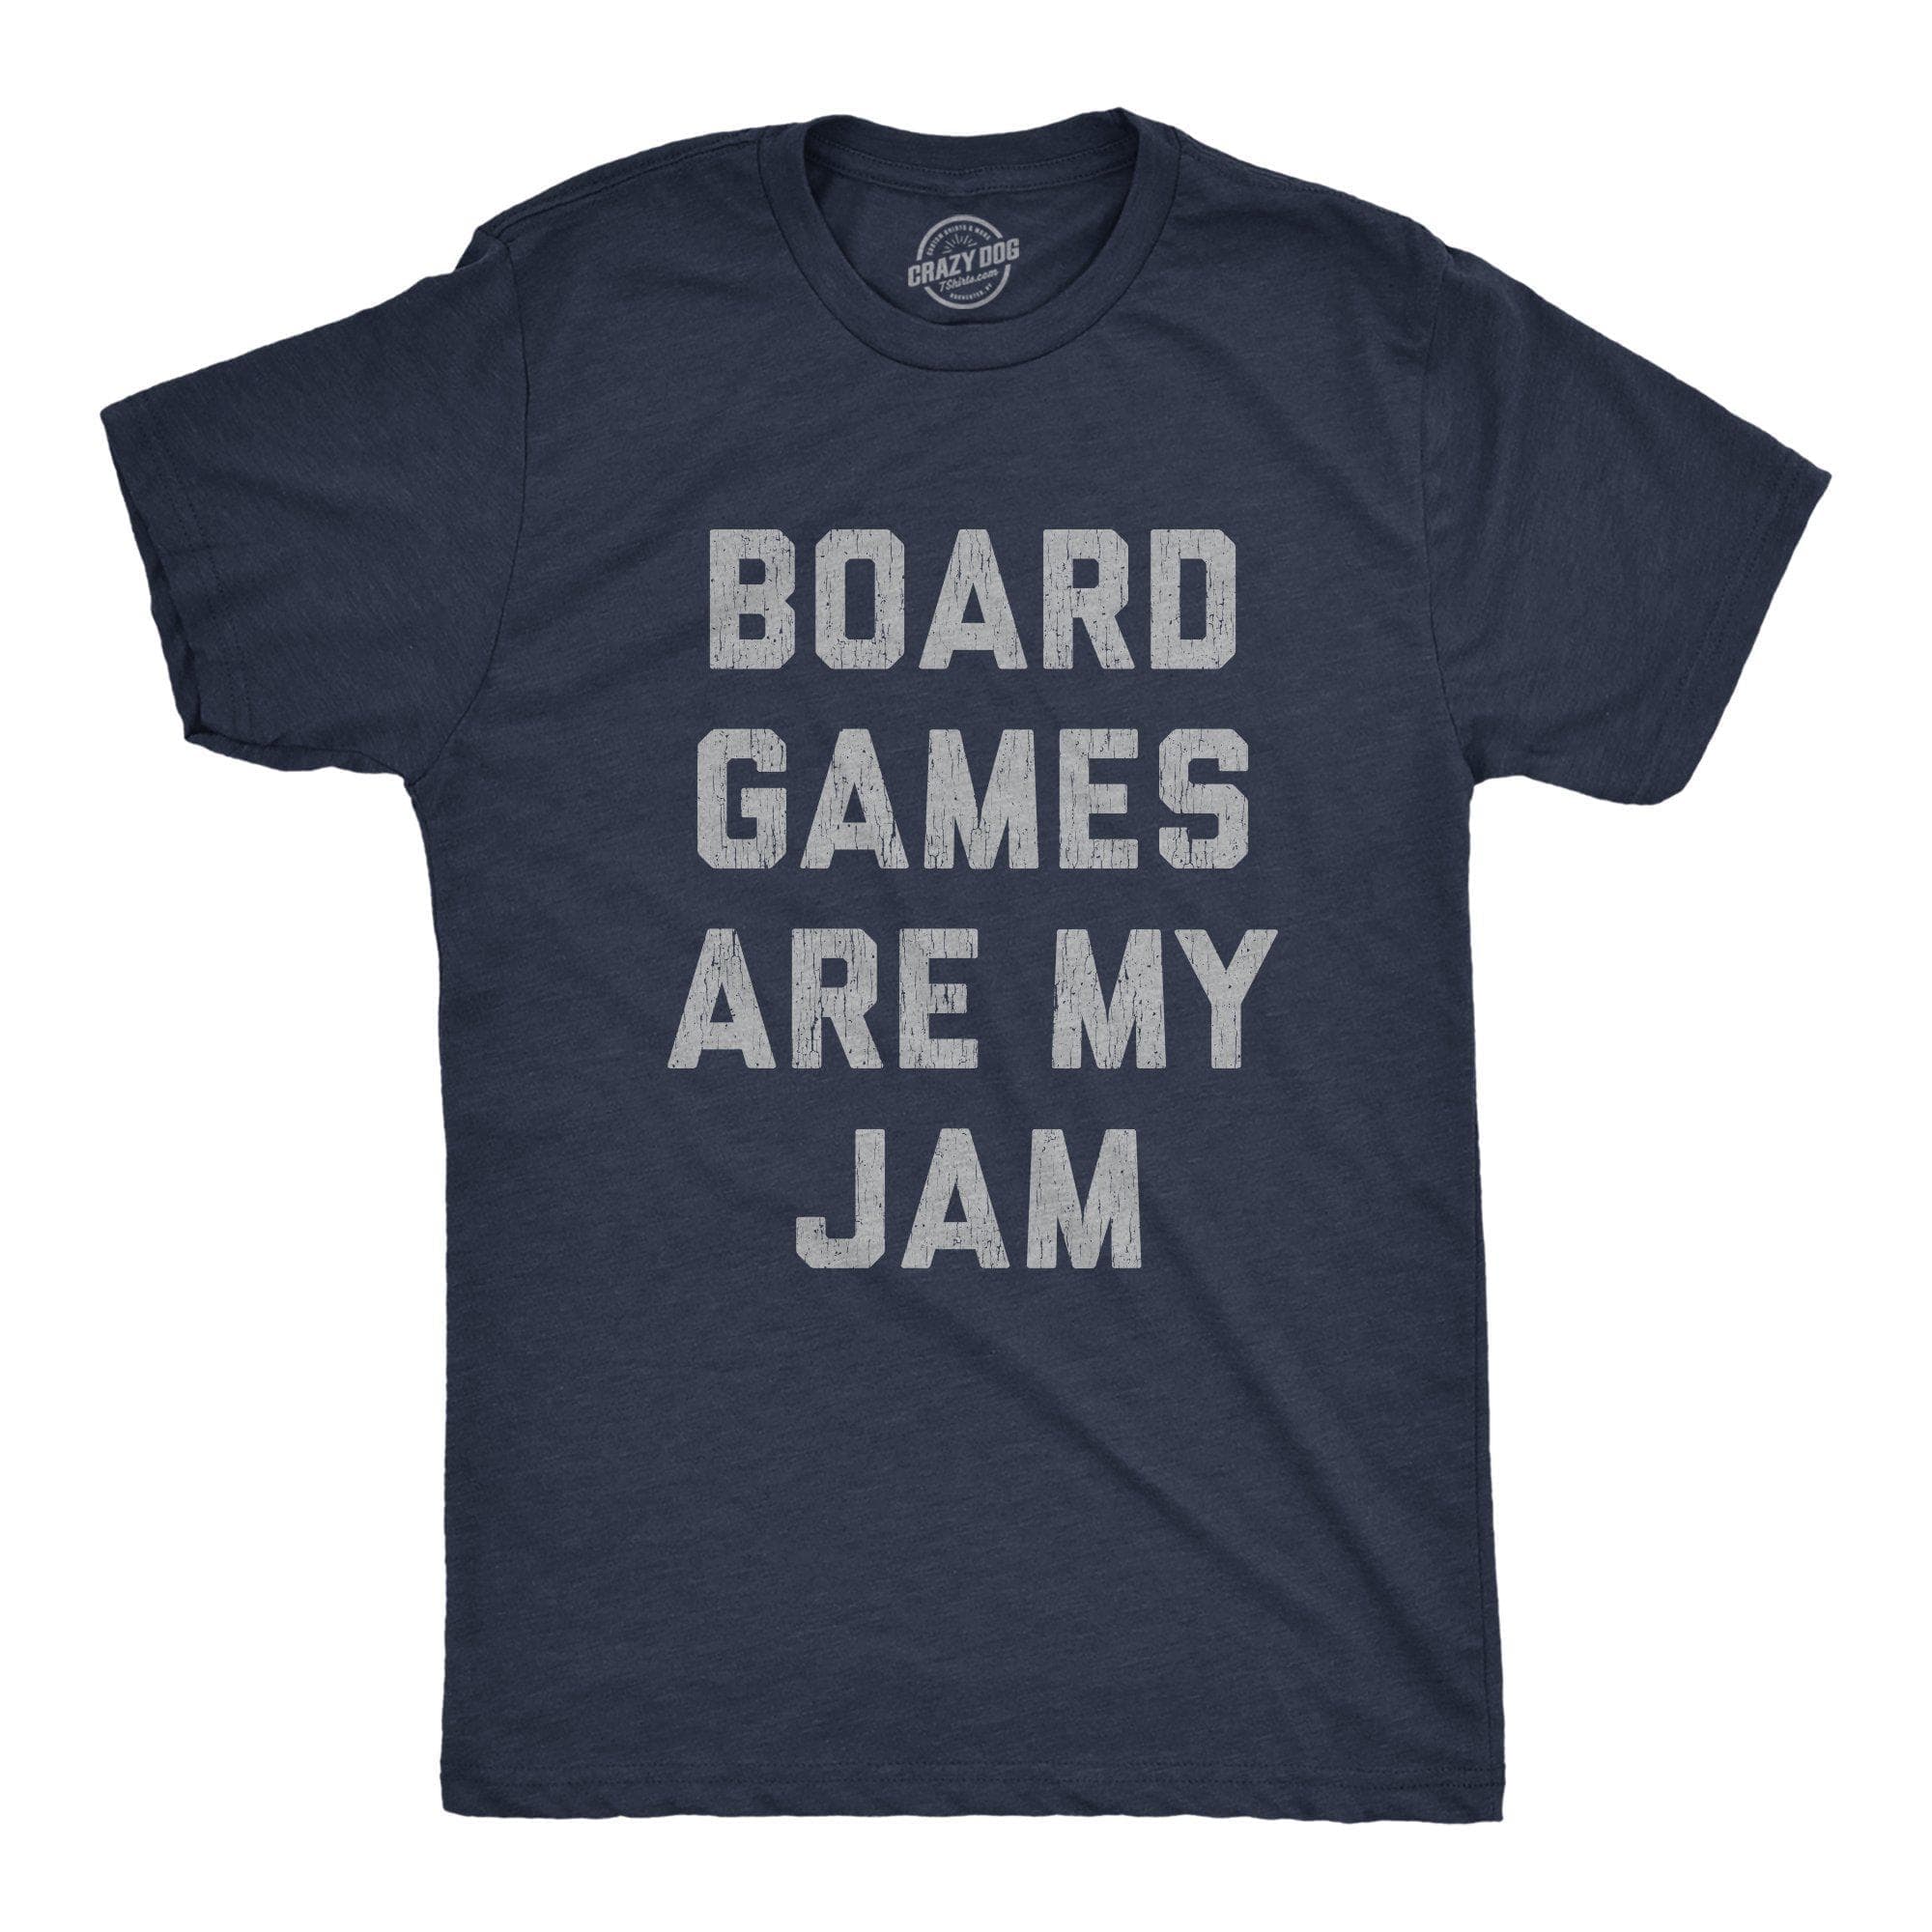 Board Games Are My Jam Men's Tshirt - Crazy Dog T-Shirts